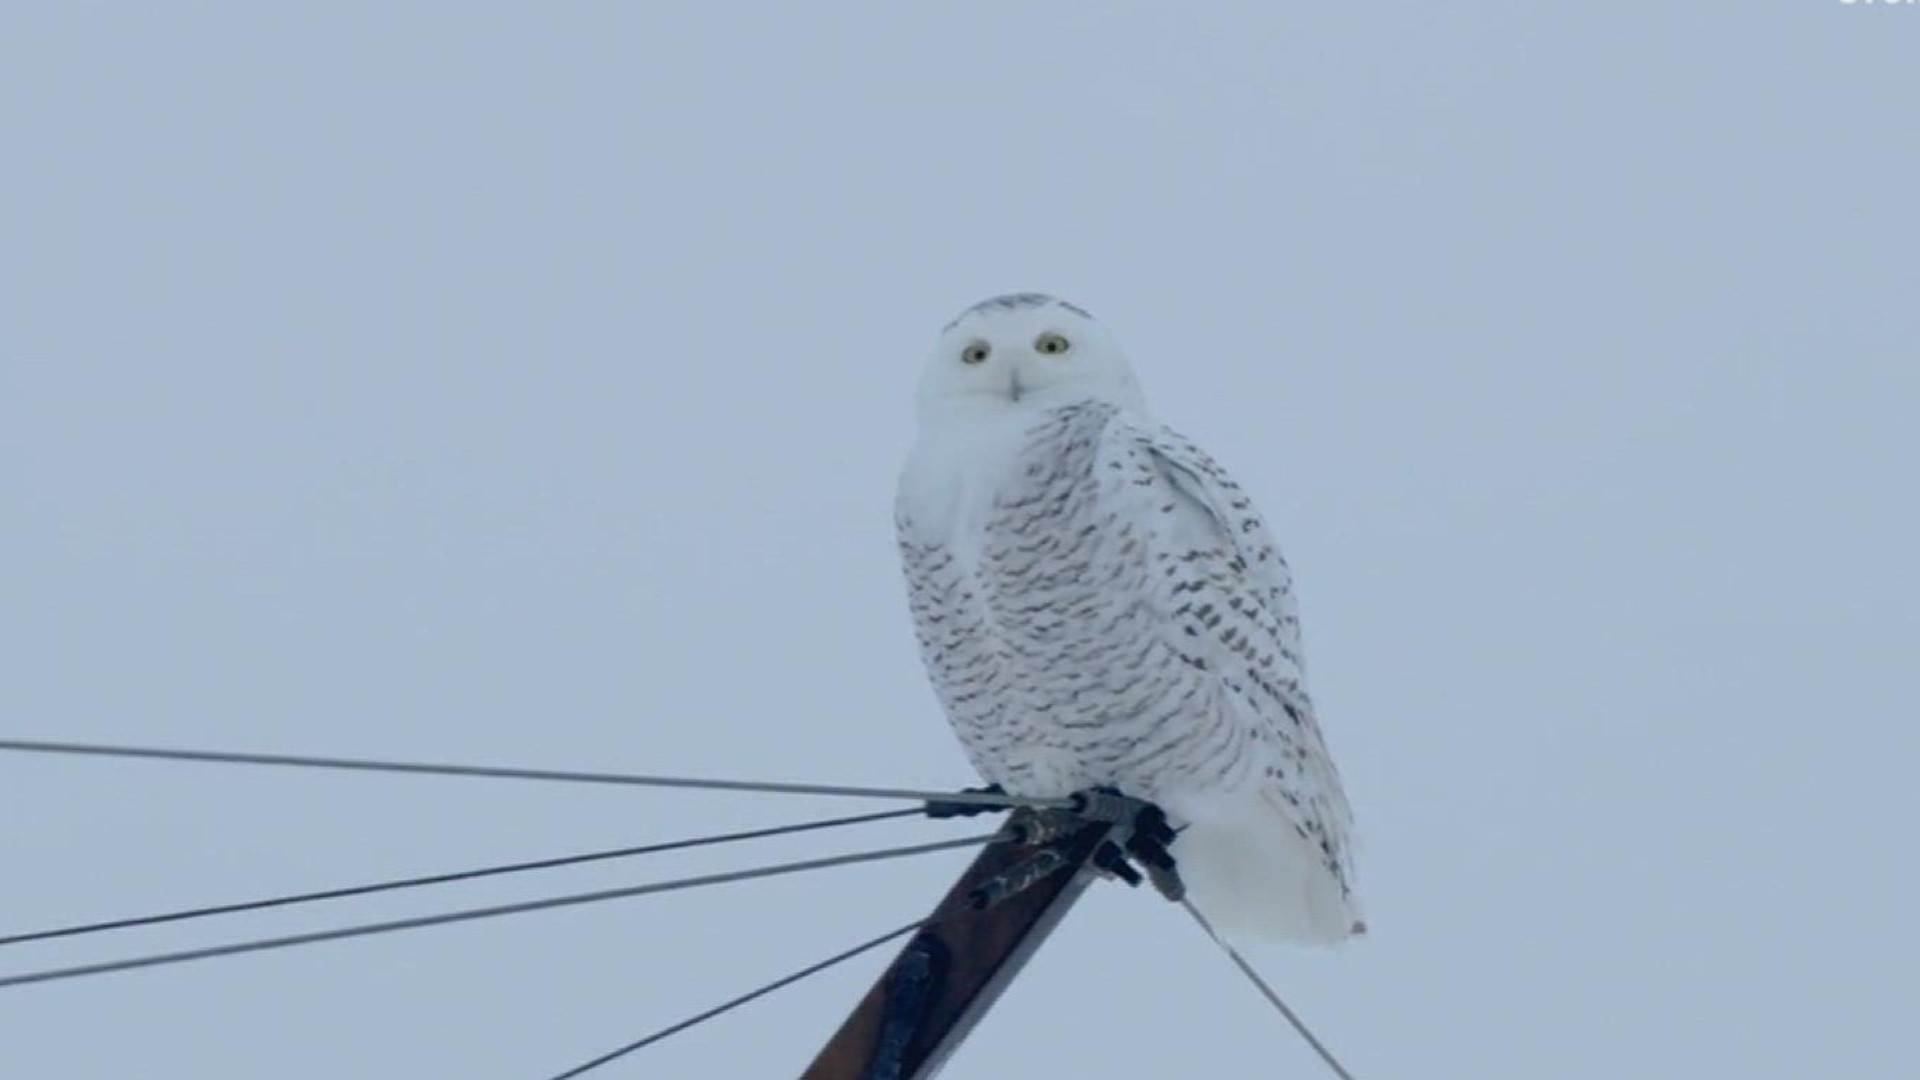 Although snowy owls typically only travel as far south as southern Canada, occasionally they will move beyond the Canadian border into the Northern U.S.